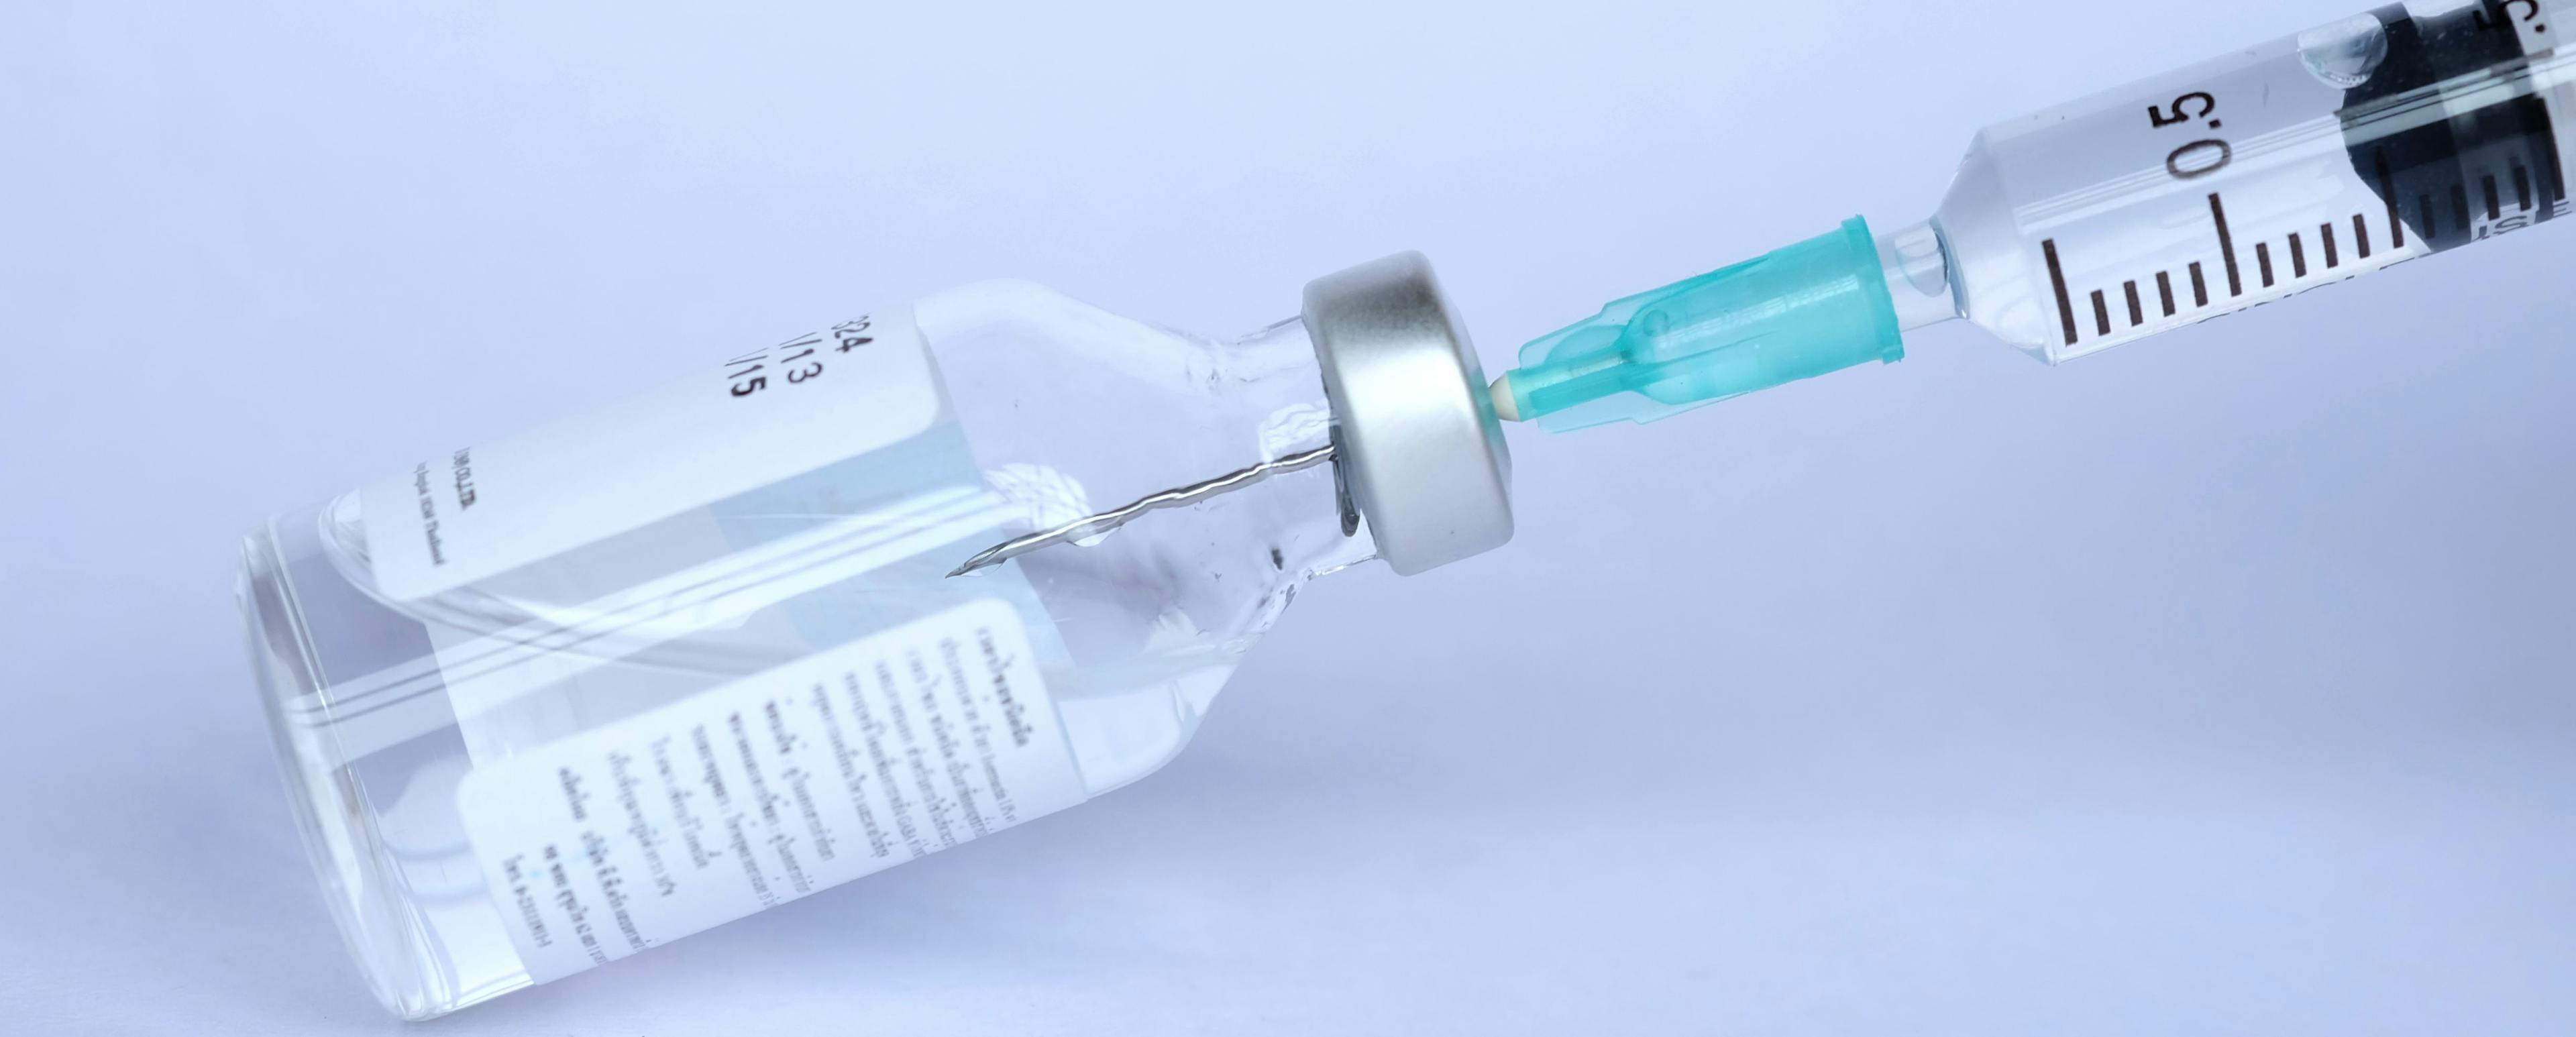 Injectable Antibiotics Recalled Due to Sterility Concerns